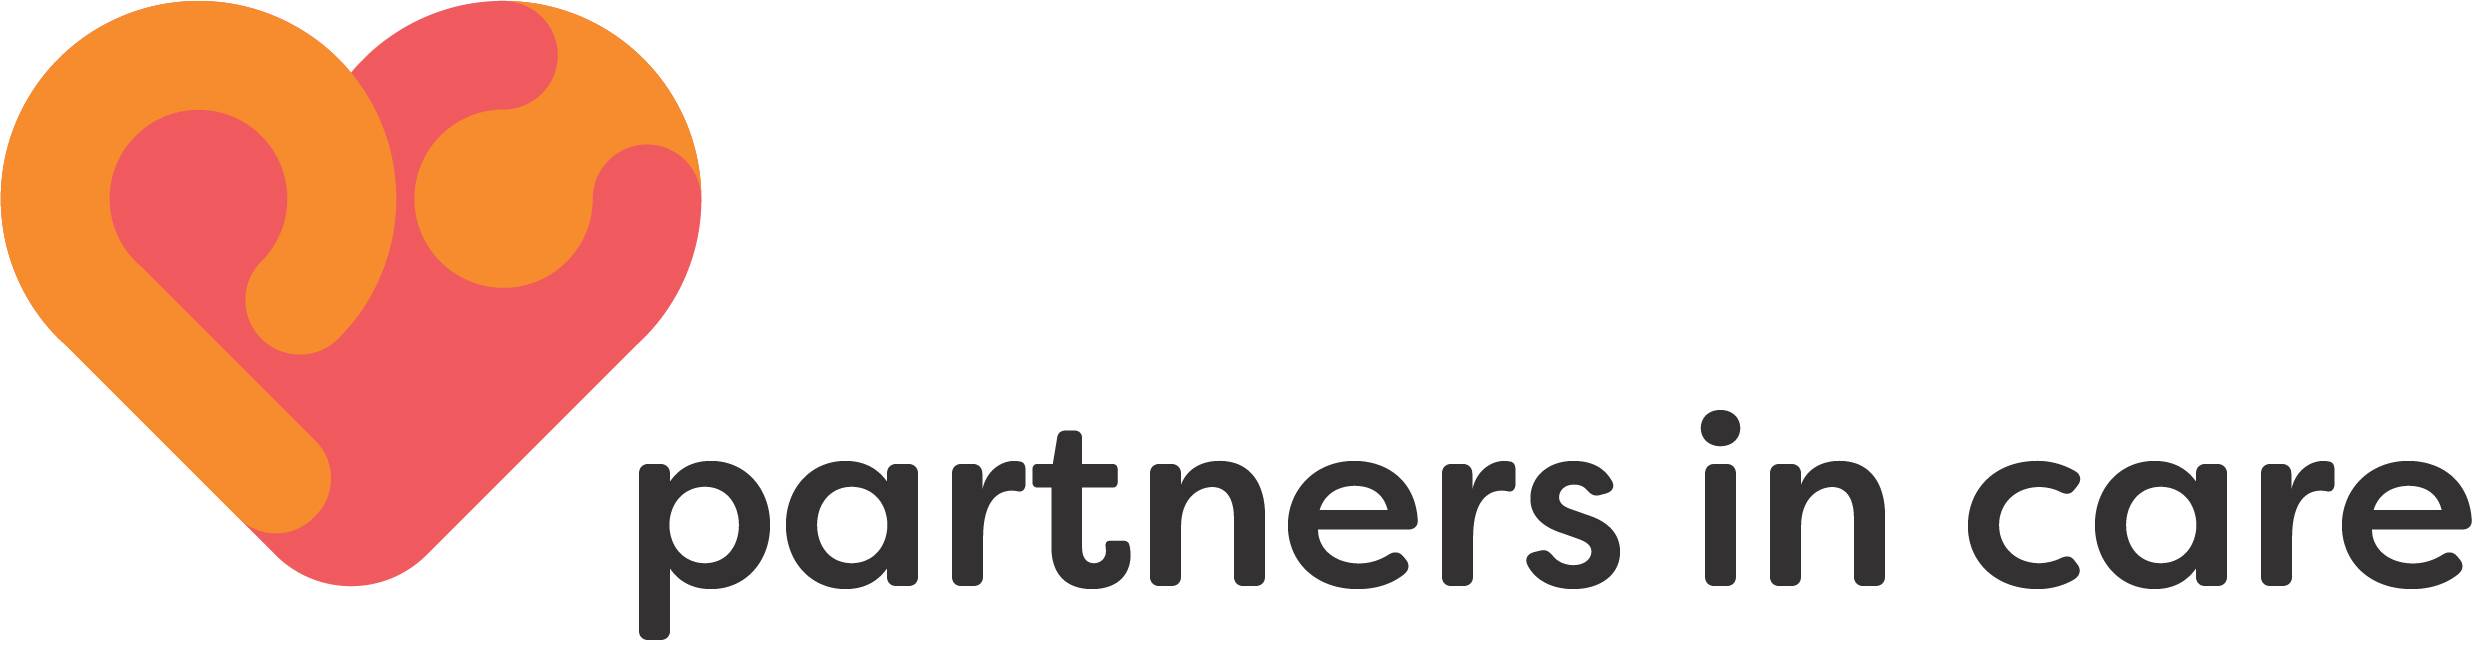 Partners in care logo with heart